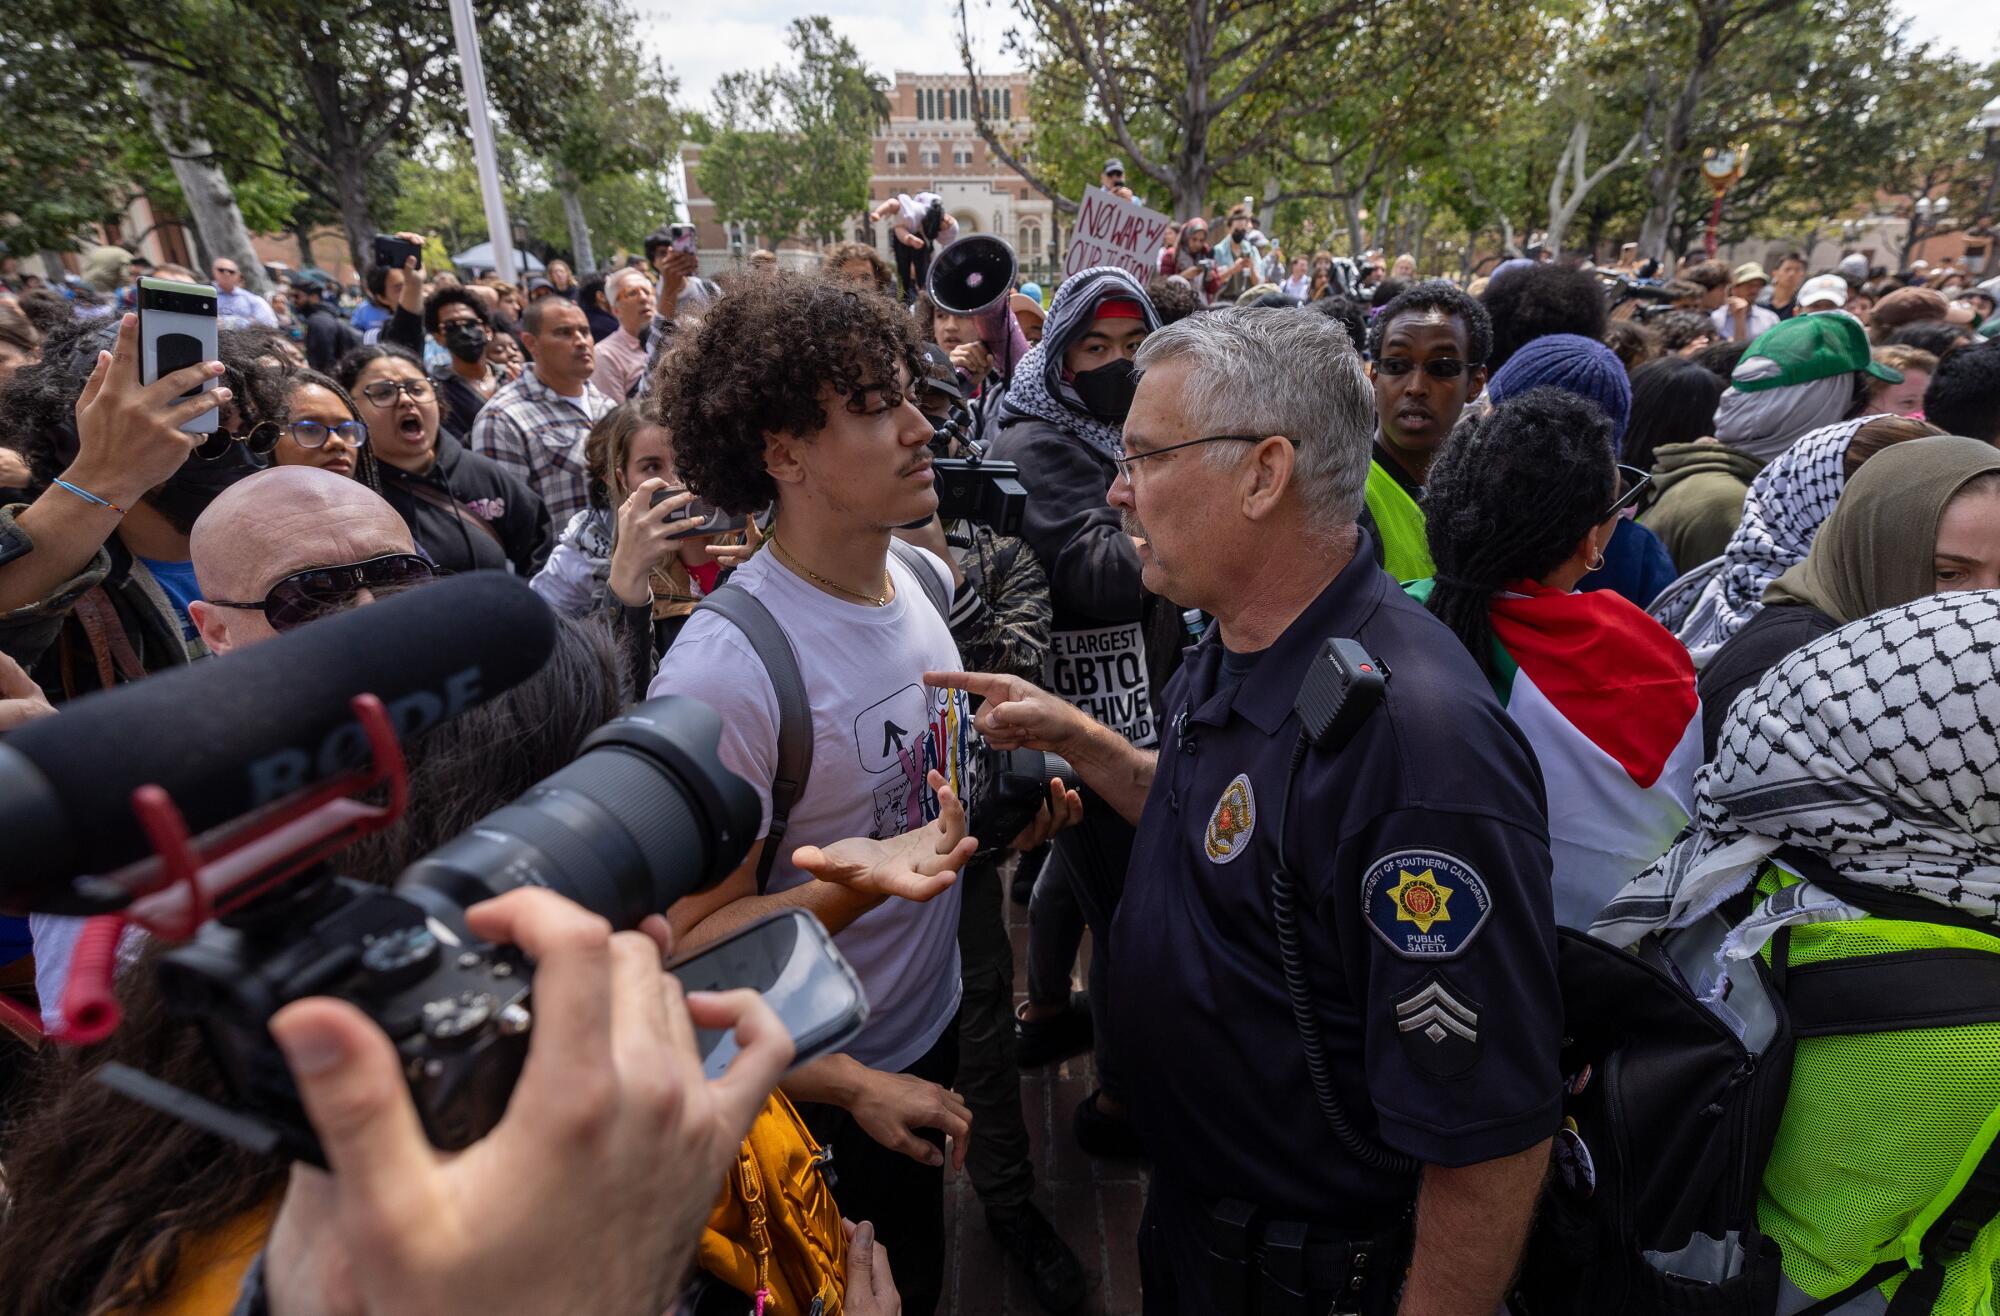 Public safety officers confront pro-Palestinian demonstrators at USC.